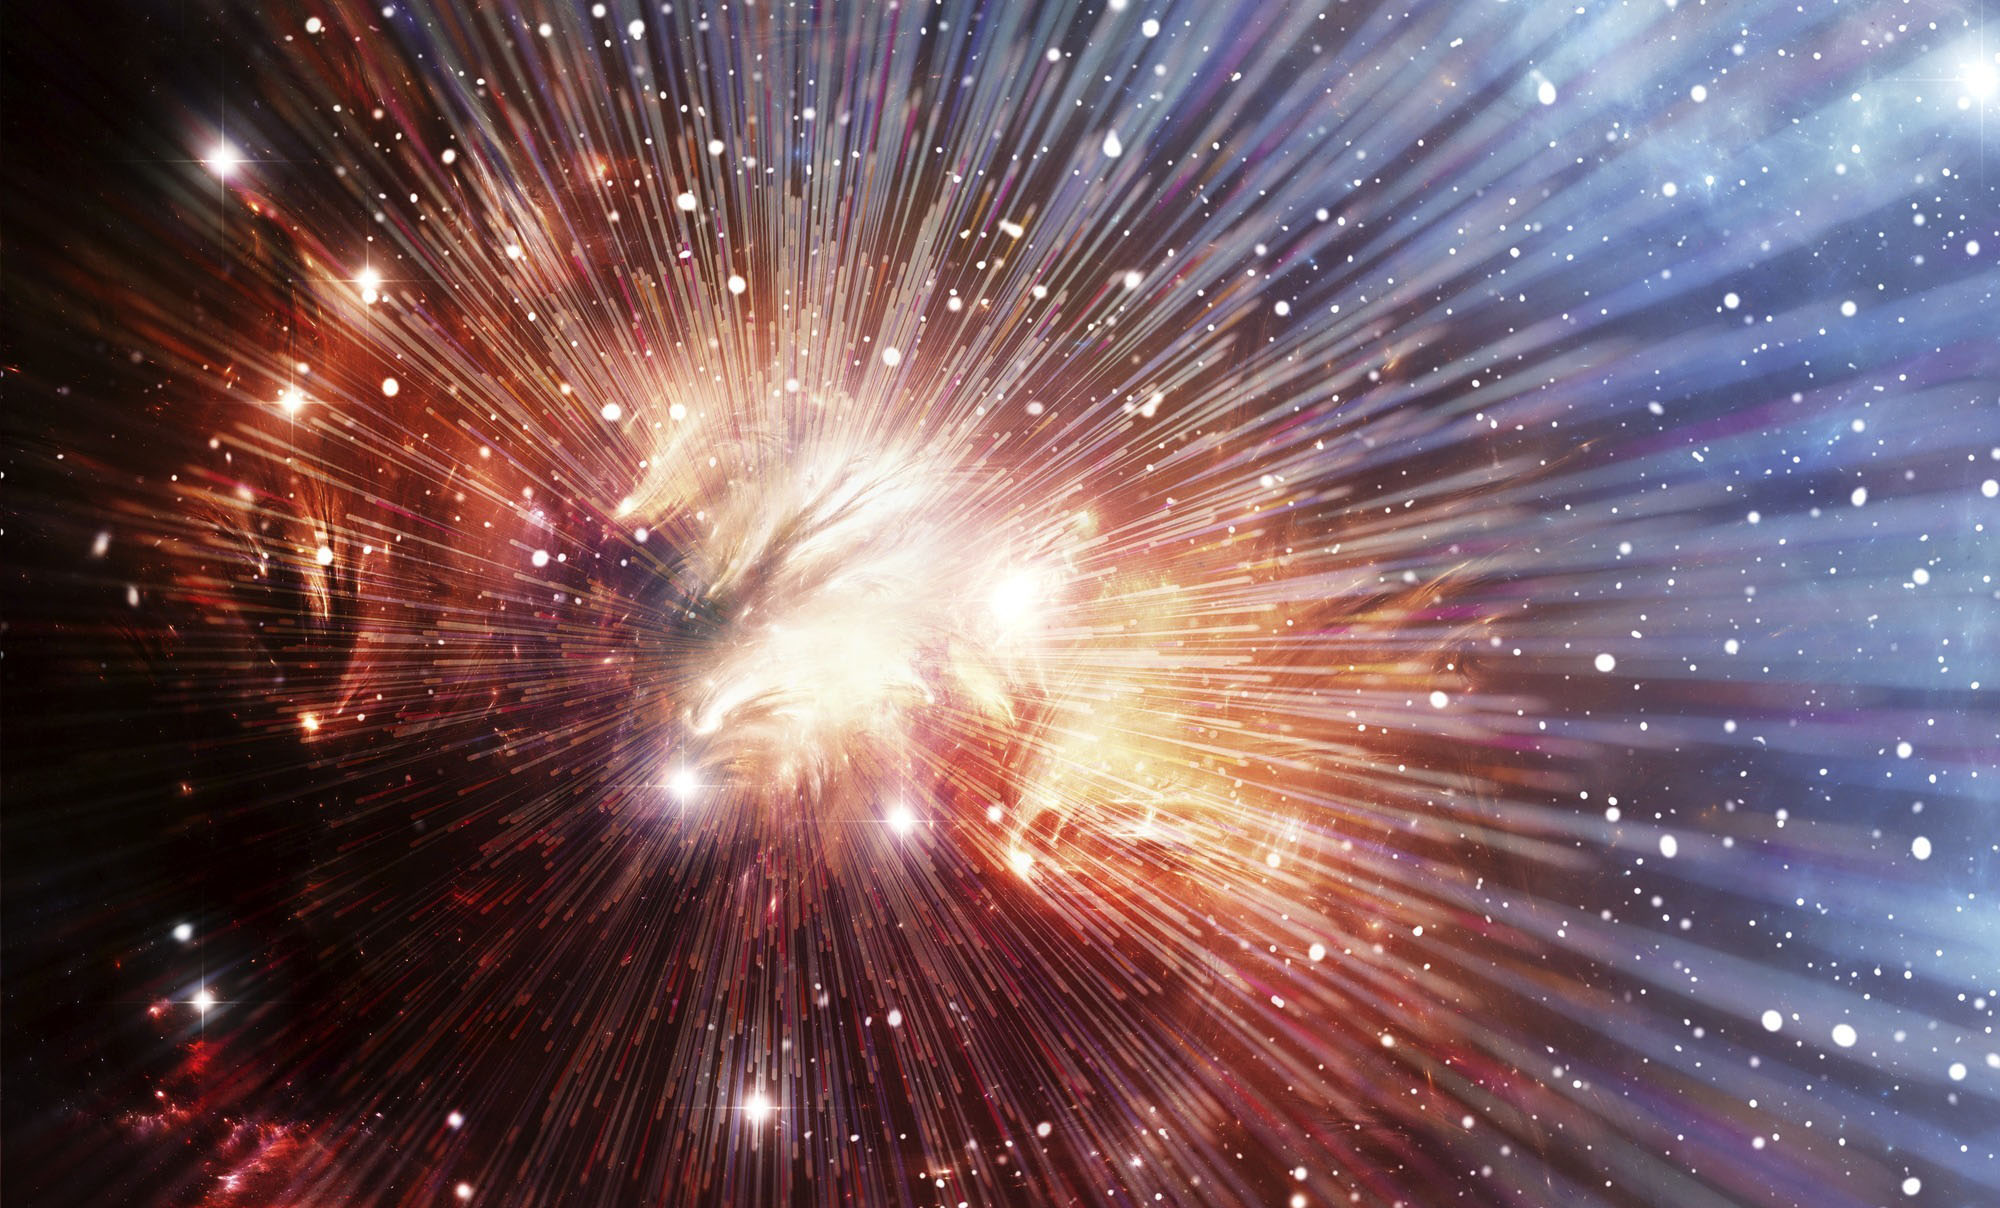 Explosion of light and matter in the universe.